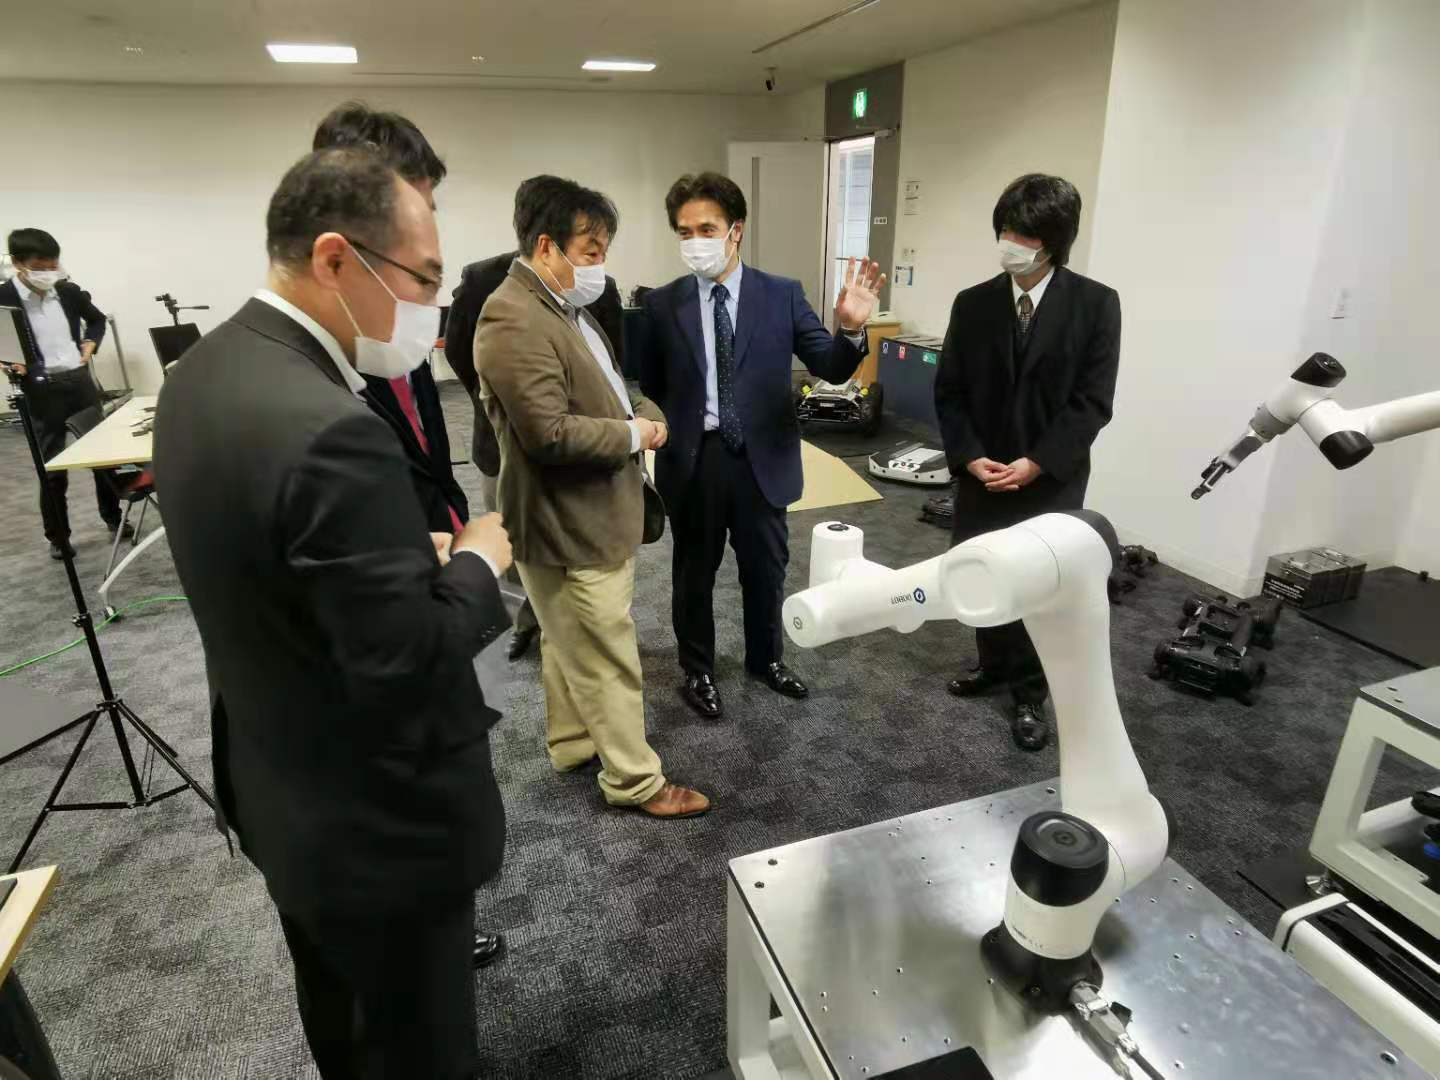 Dobot User Conference (Japan) 2020 & New Robot Launch was Successfully Closed in Tokyo